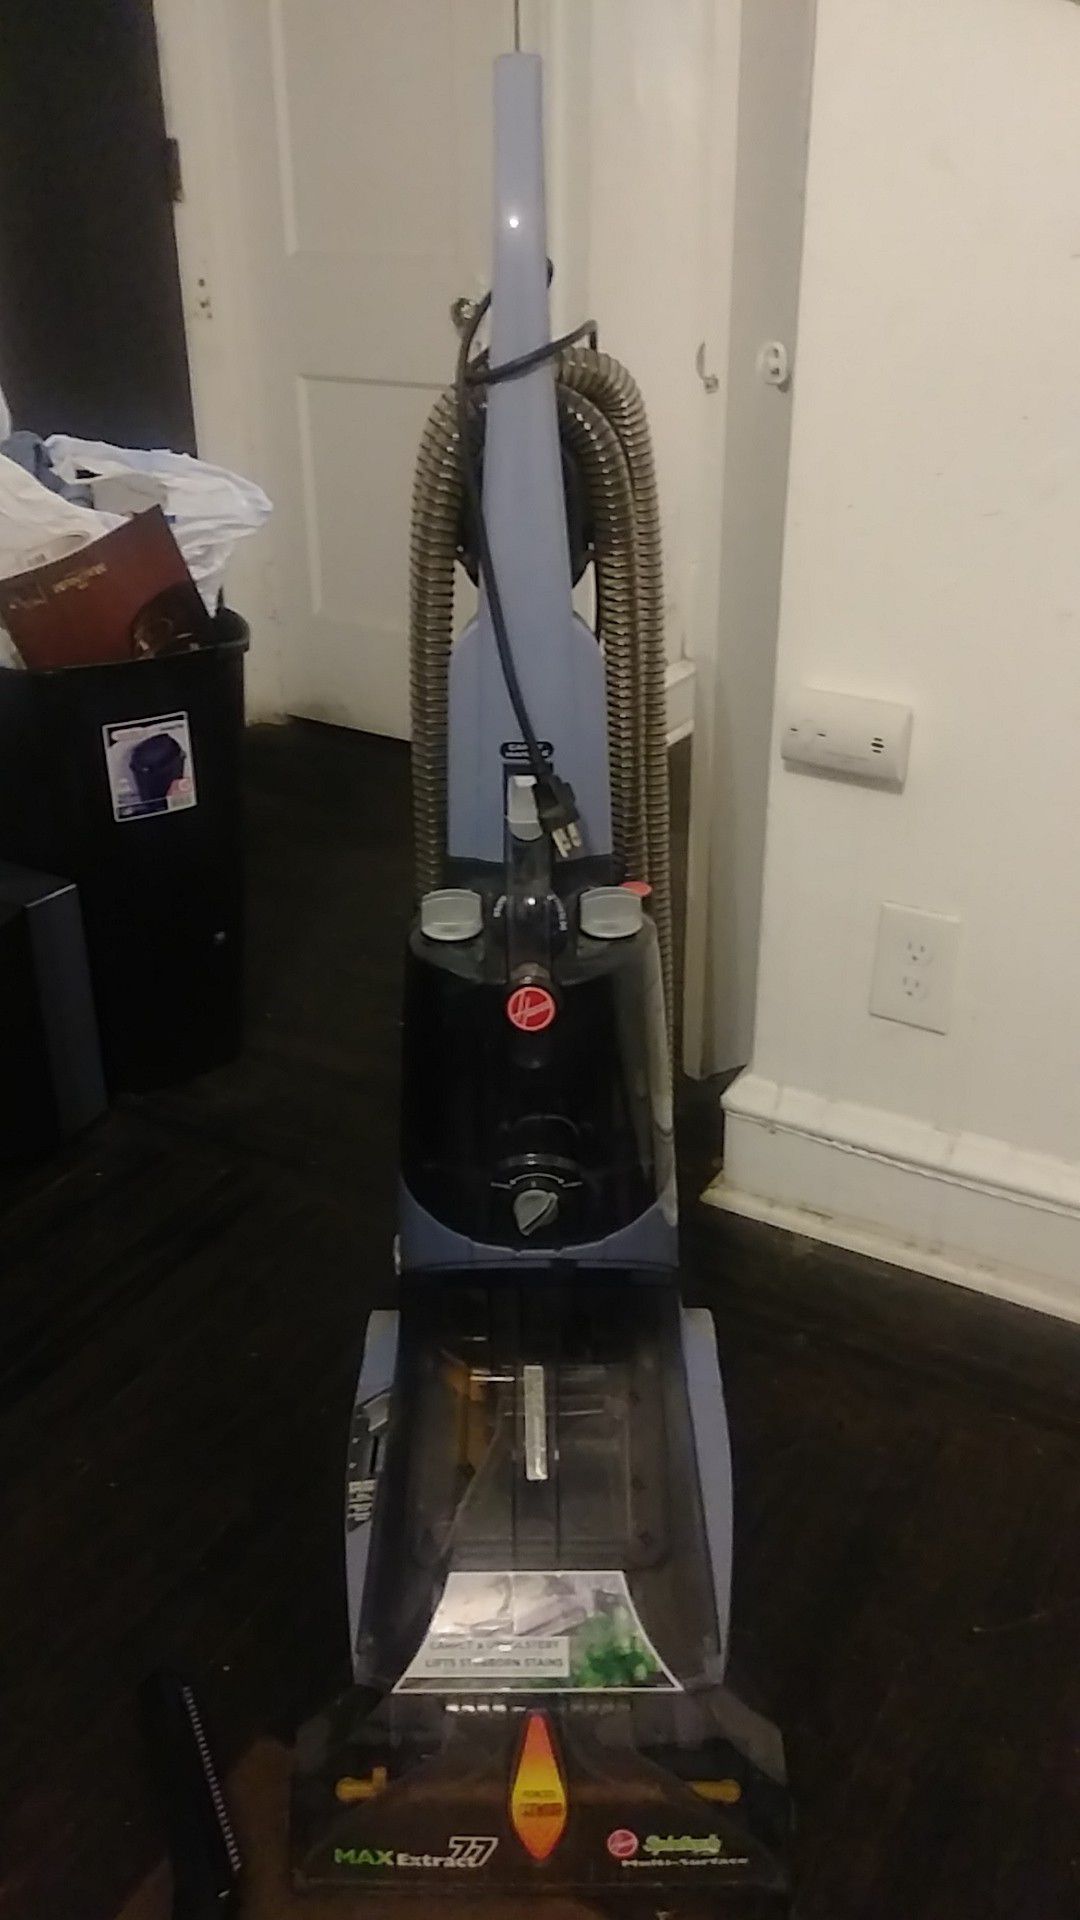 Hoover max extract 77 Multi-Surface Hardwood Floor and Carpet Cleaner Machine FH50240